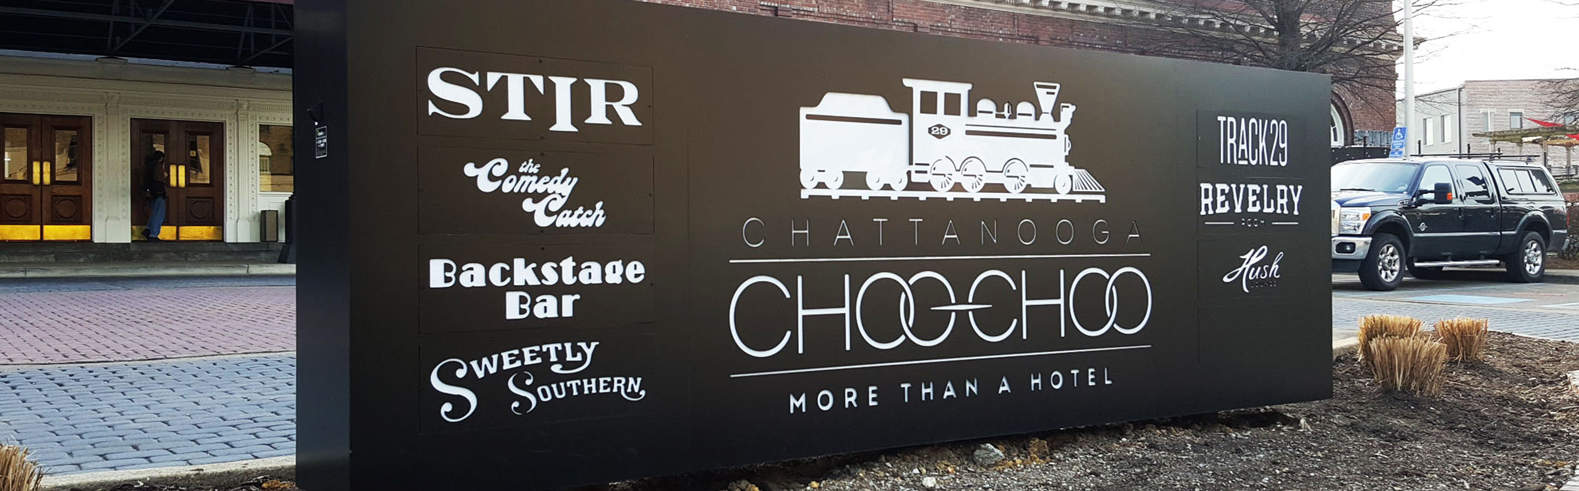 Sign in front of the Chattanooga Choo Choo featuring businesses on location